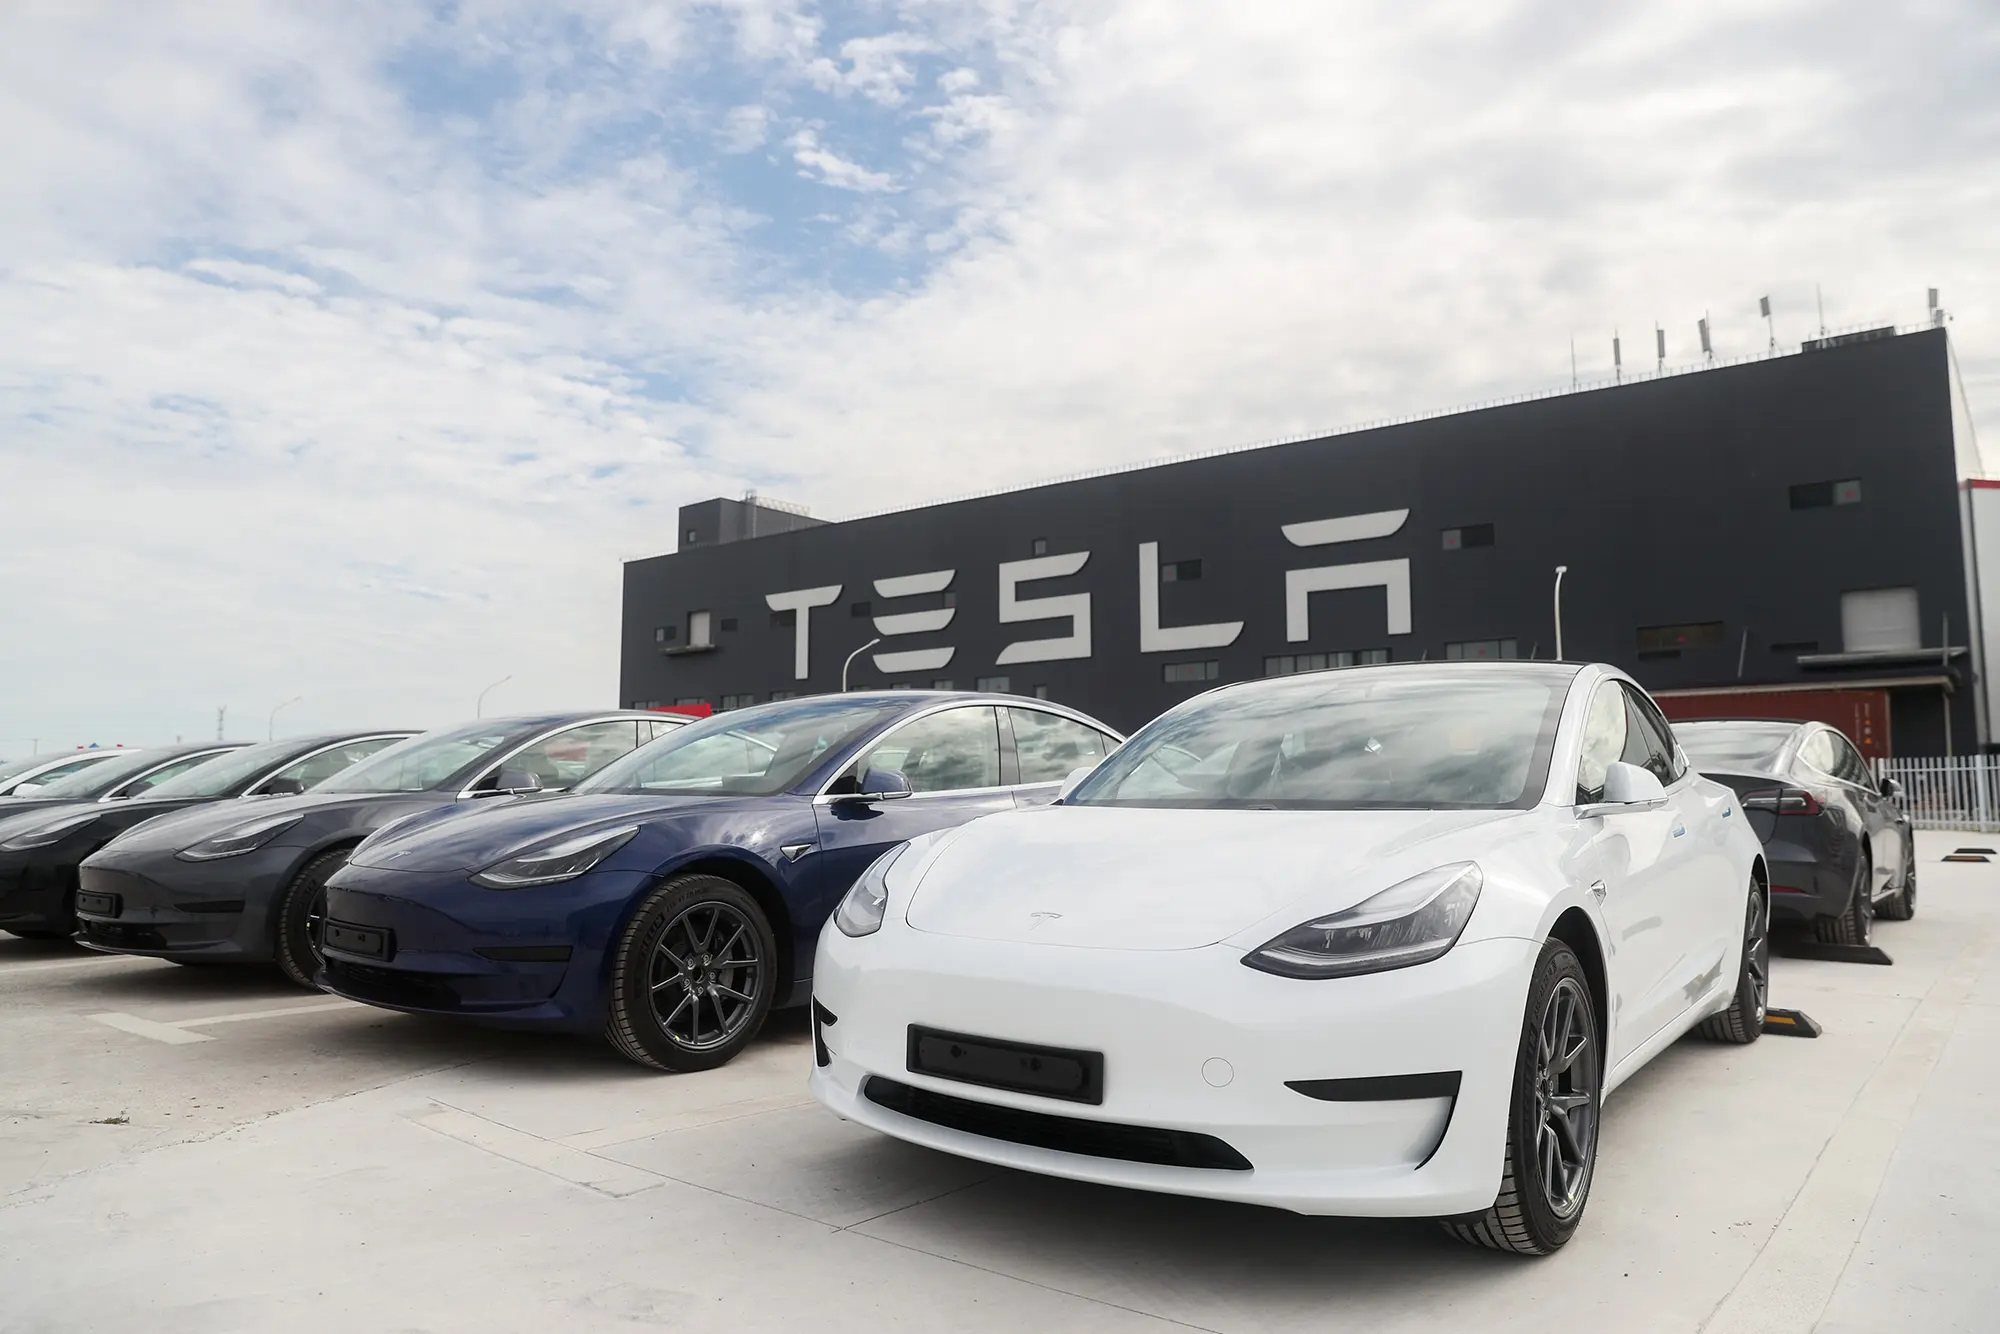 New Tesla Investigation By Feds Focuses On Vehicle Range And Personal Benefits